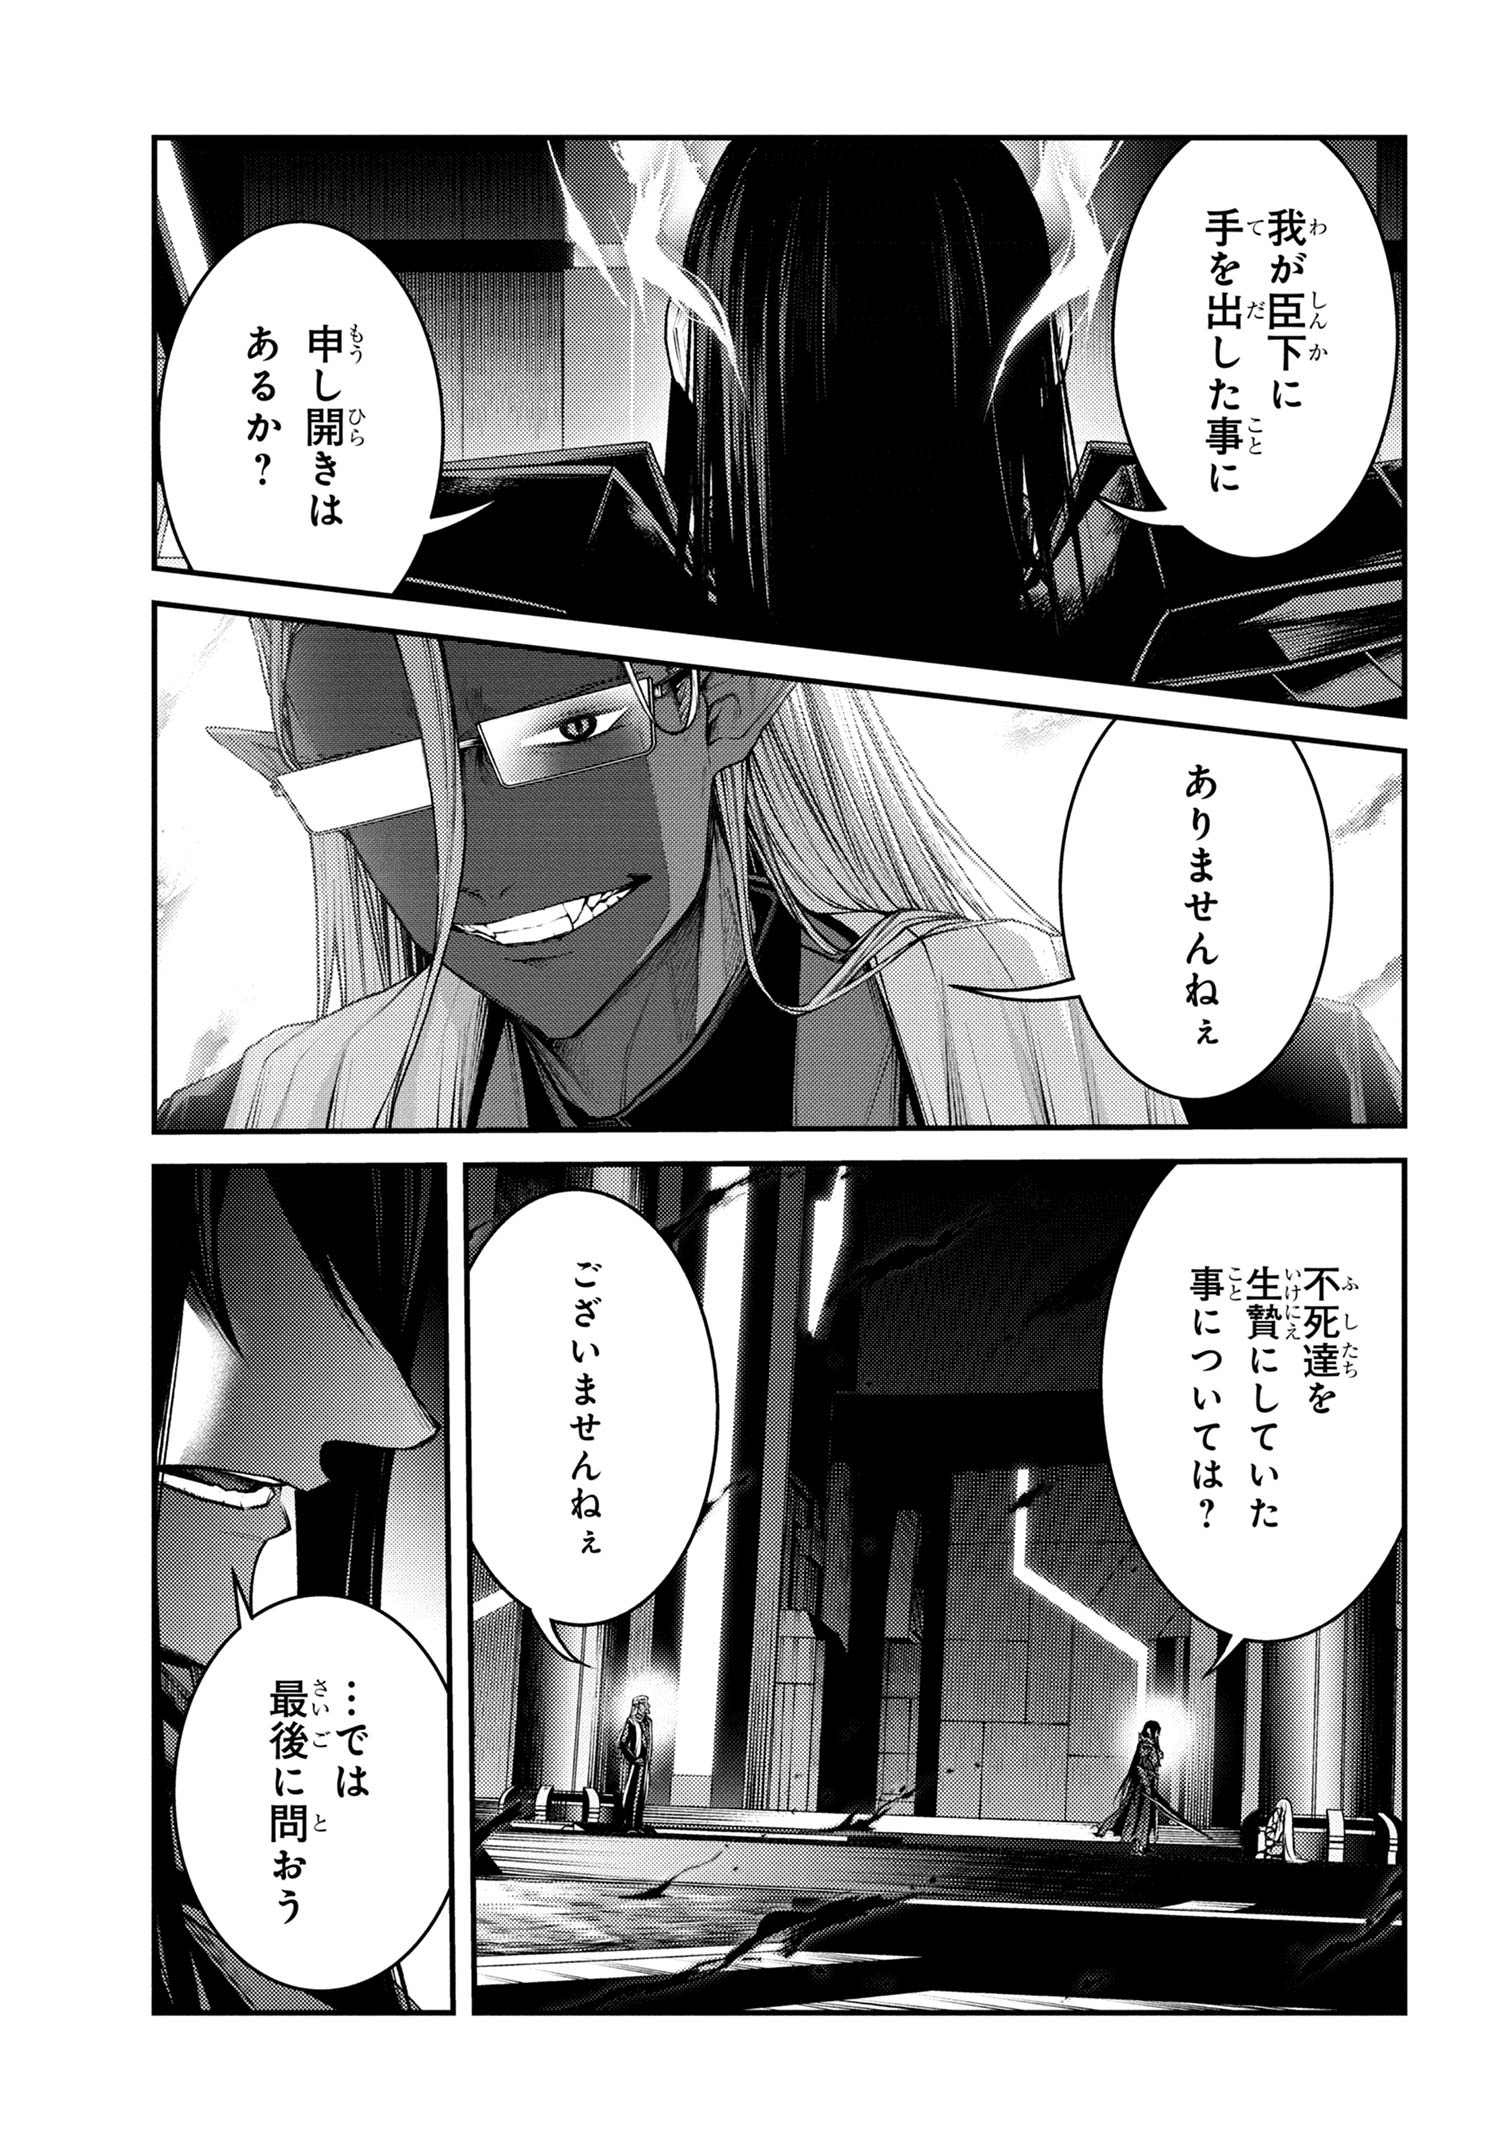 Maou 2099 - Chapter 10.2 - Page 13